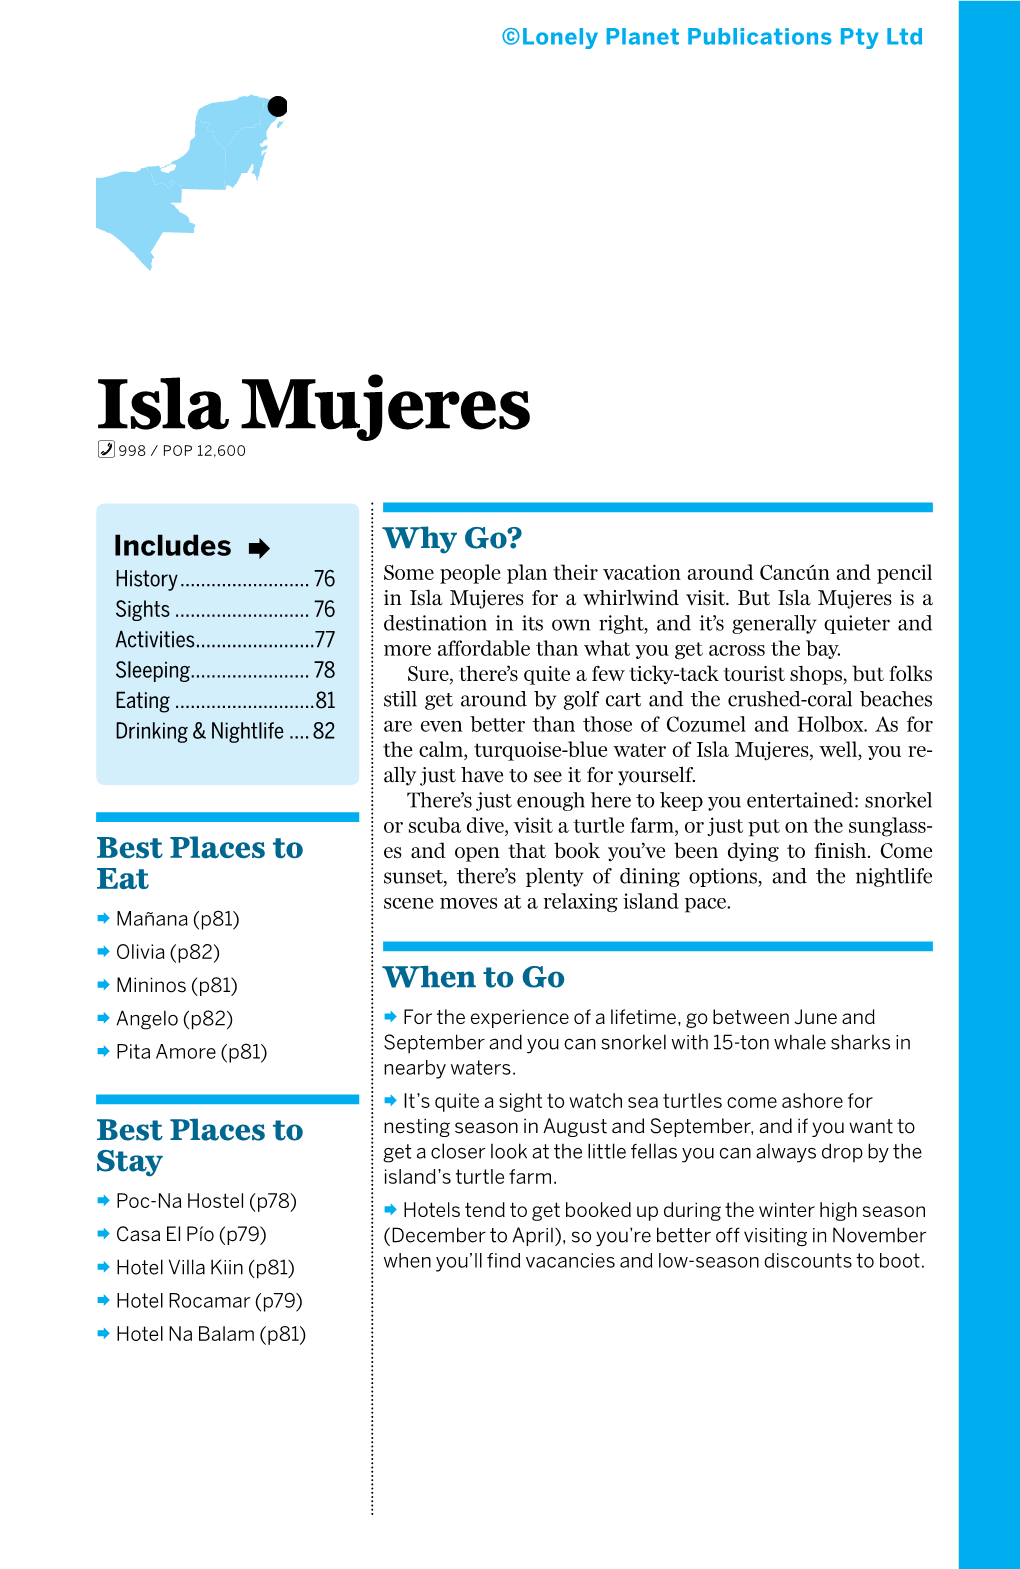 Isla Mujeres for a Whirlwind Visit